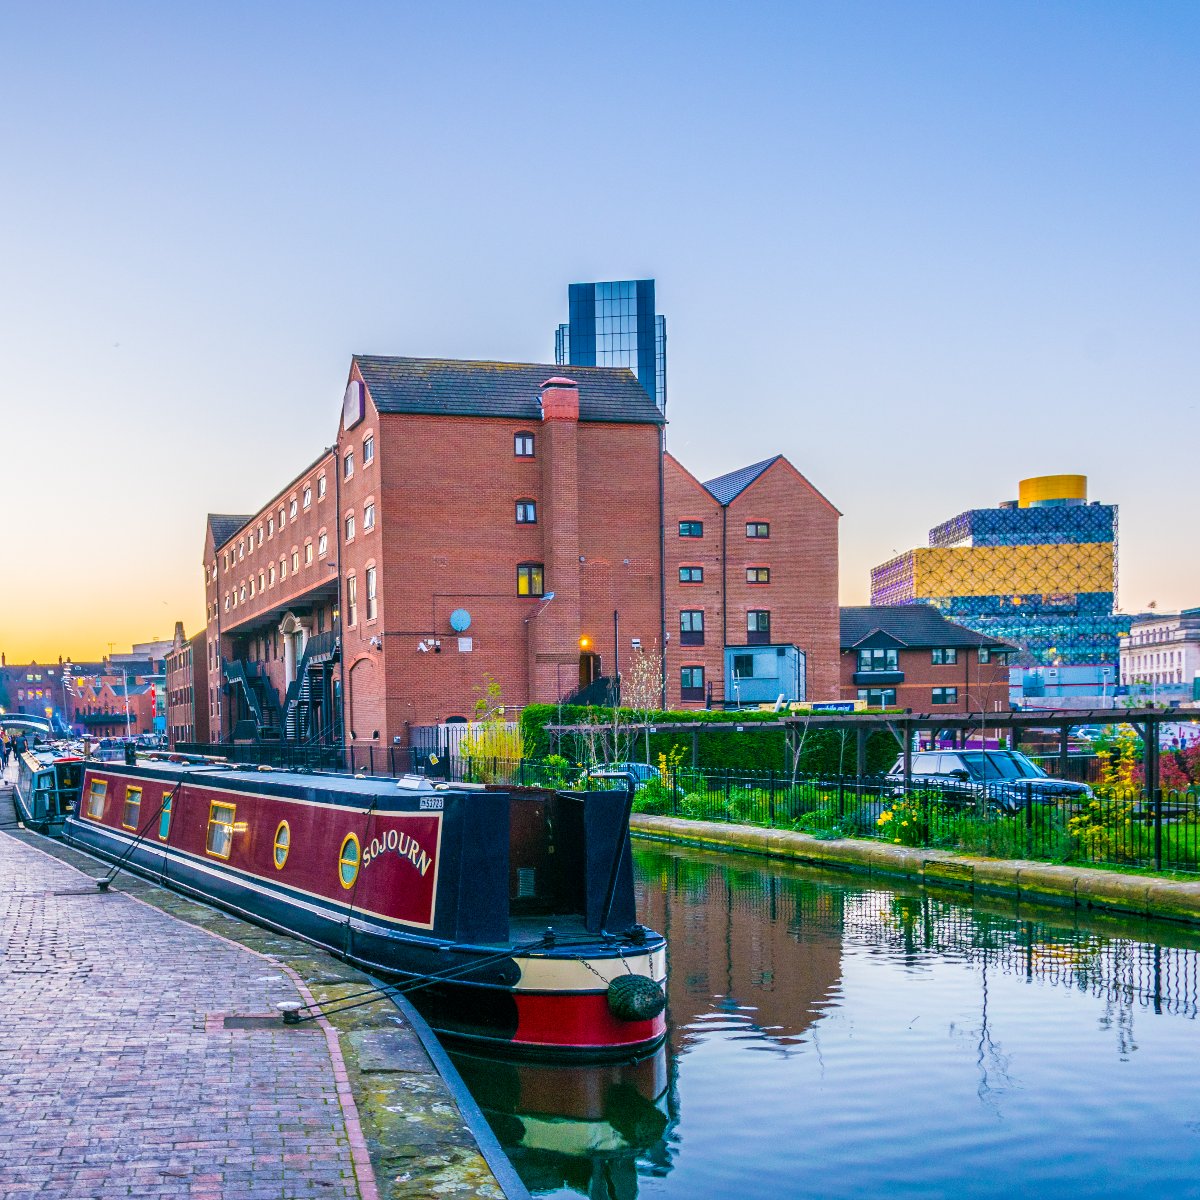 Beside the canal in Birmingham at dusk